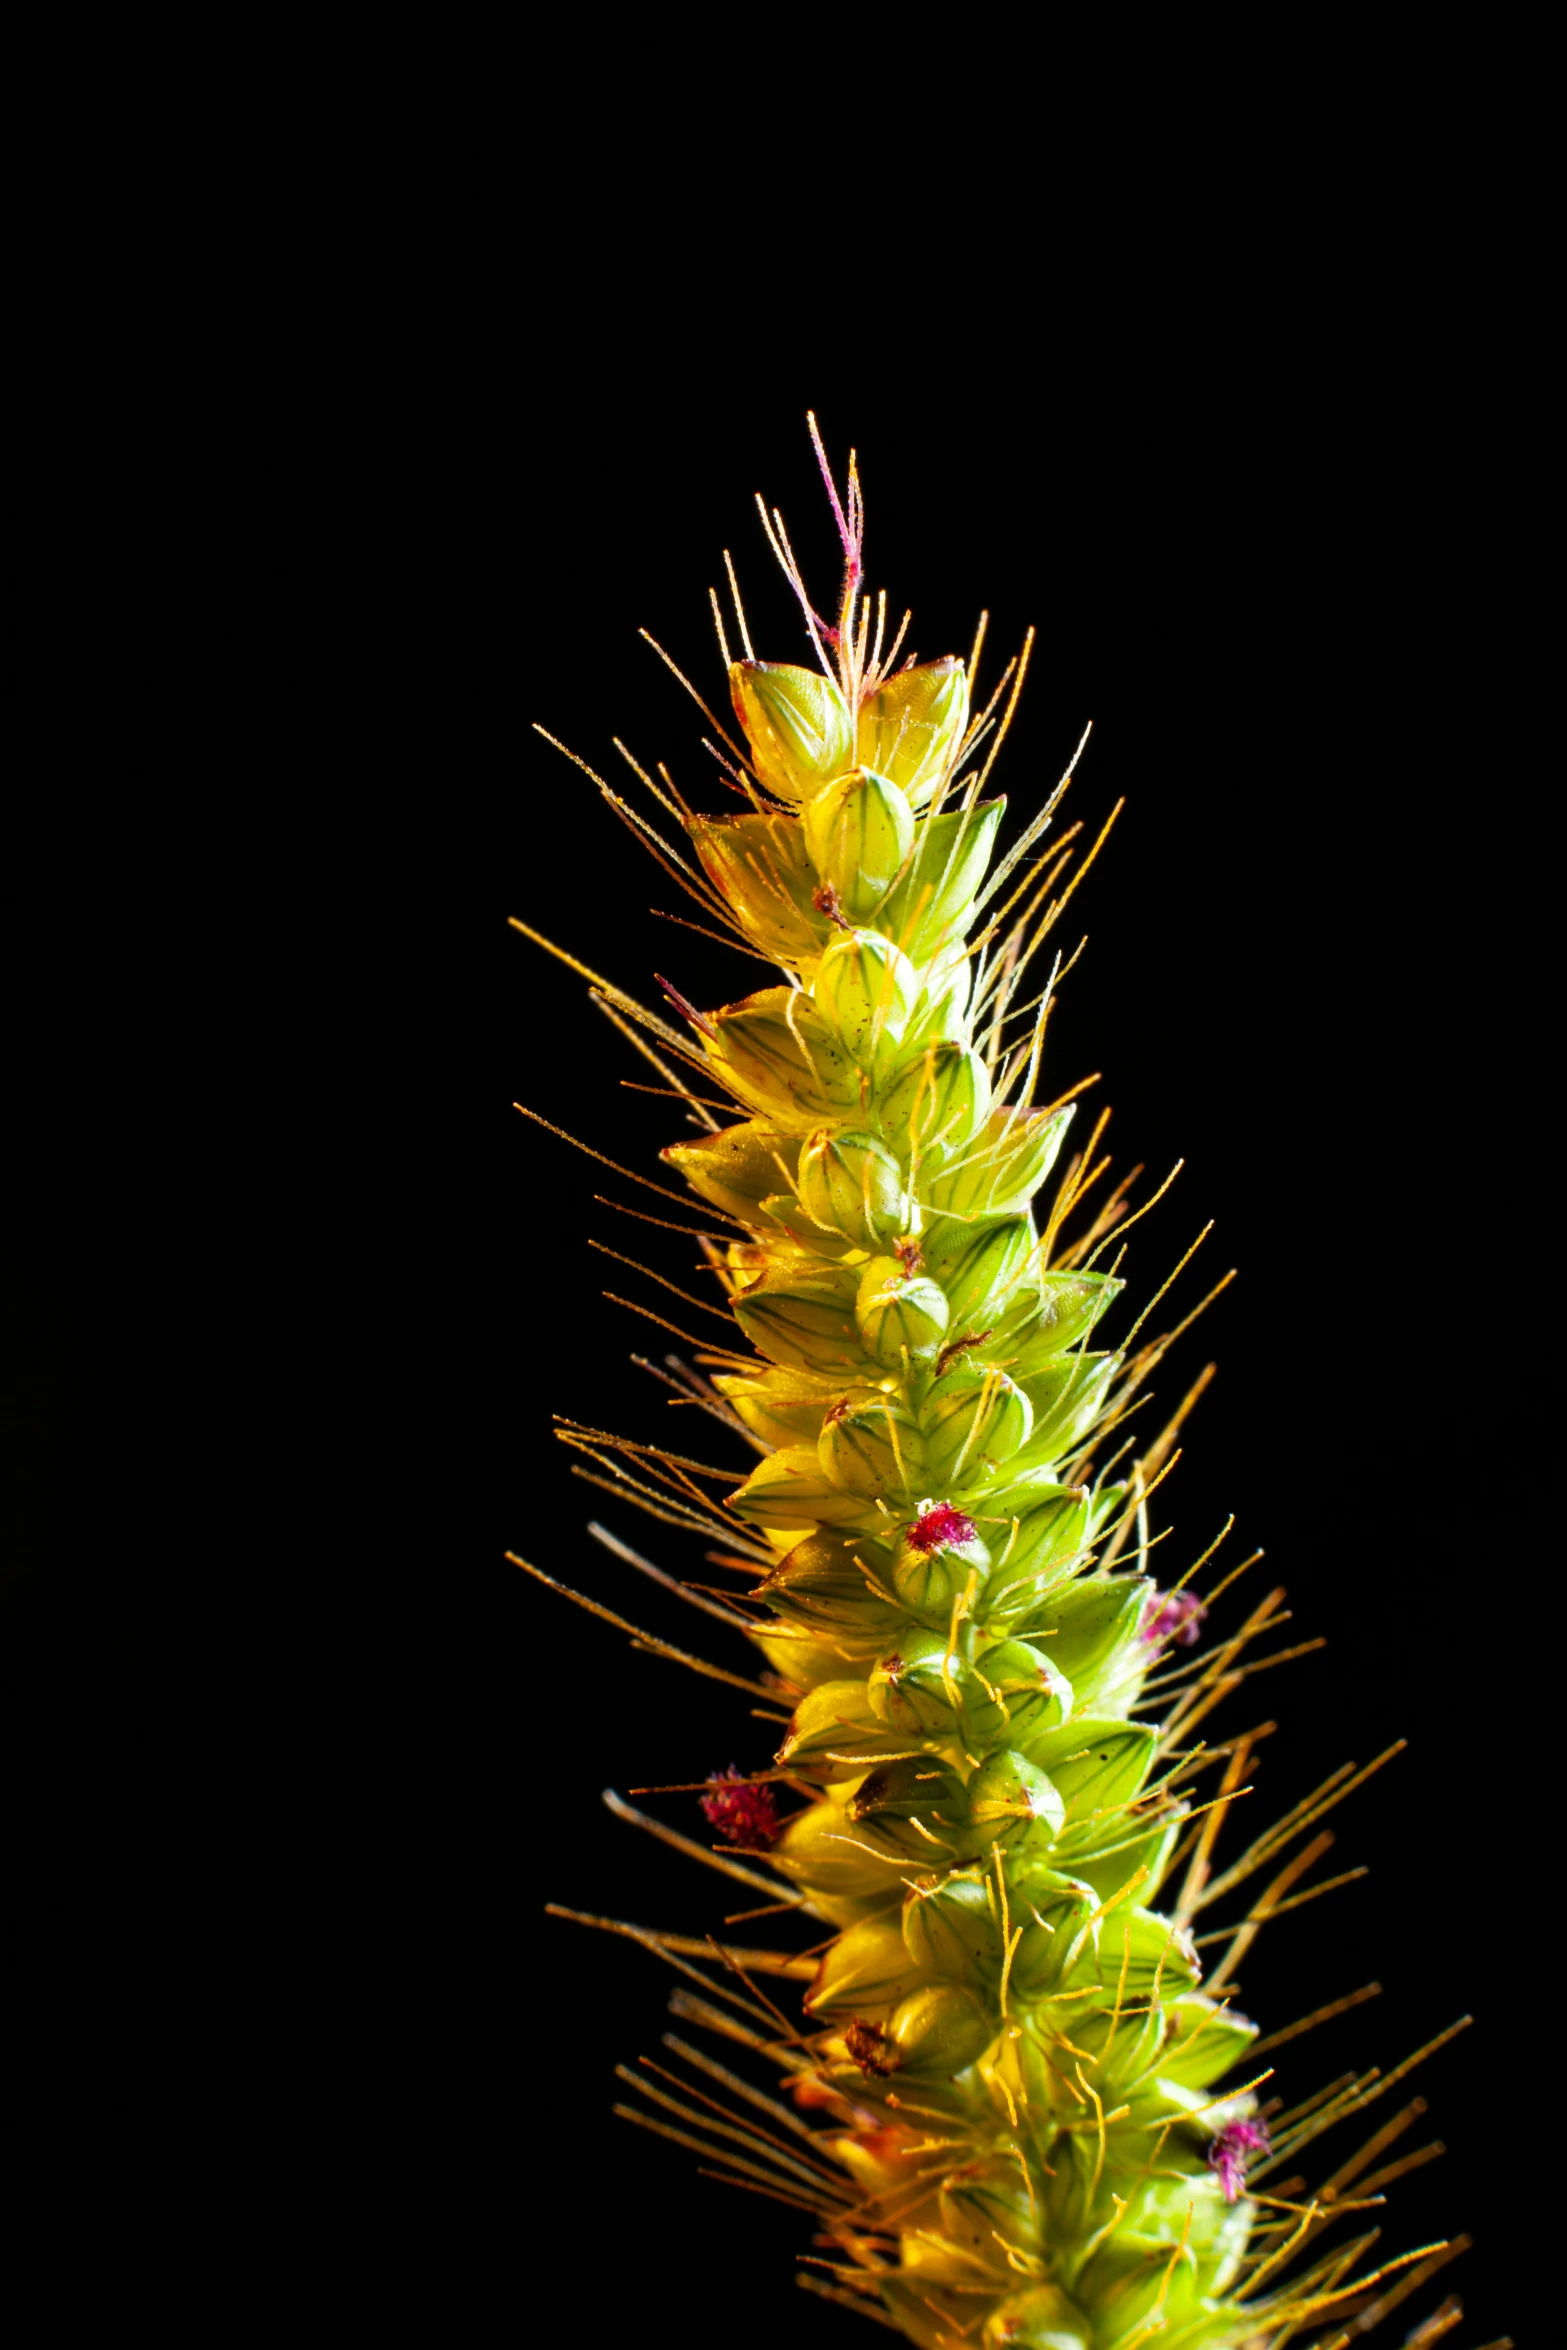 green and yellow flower on a tall plant